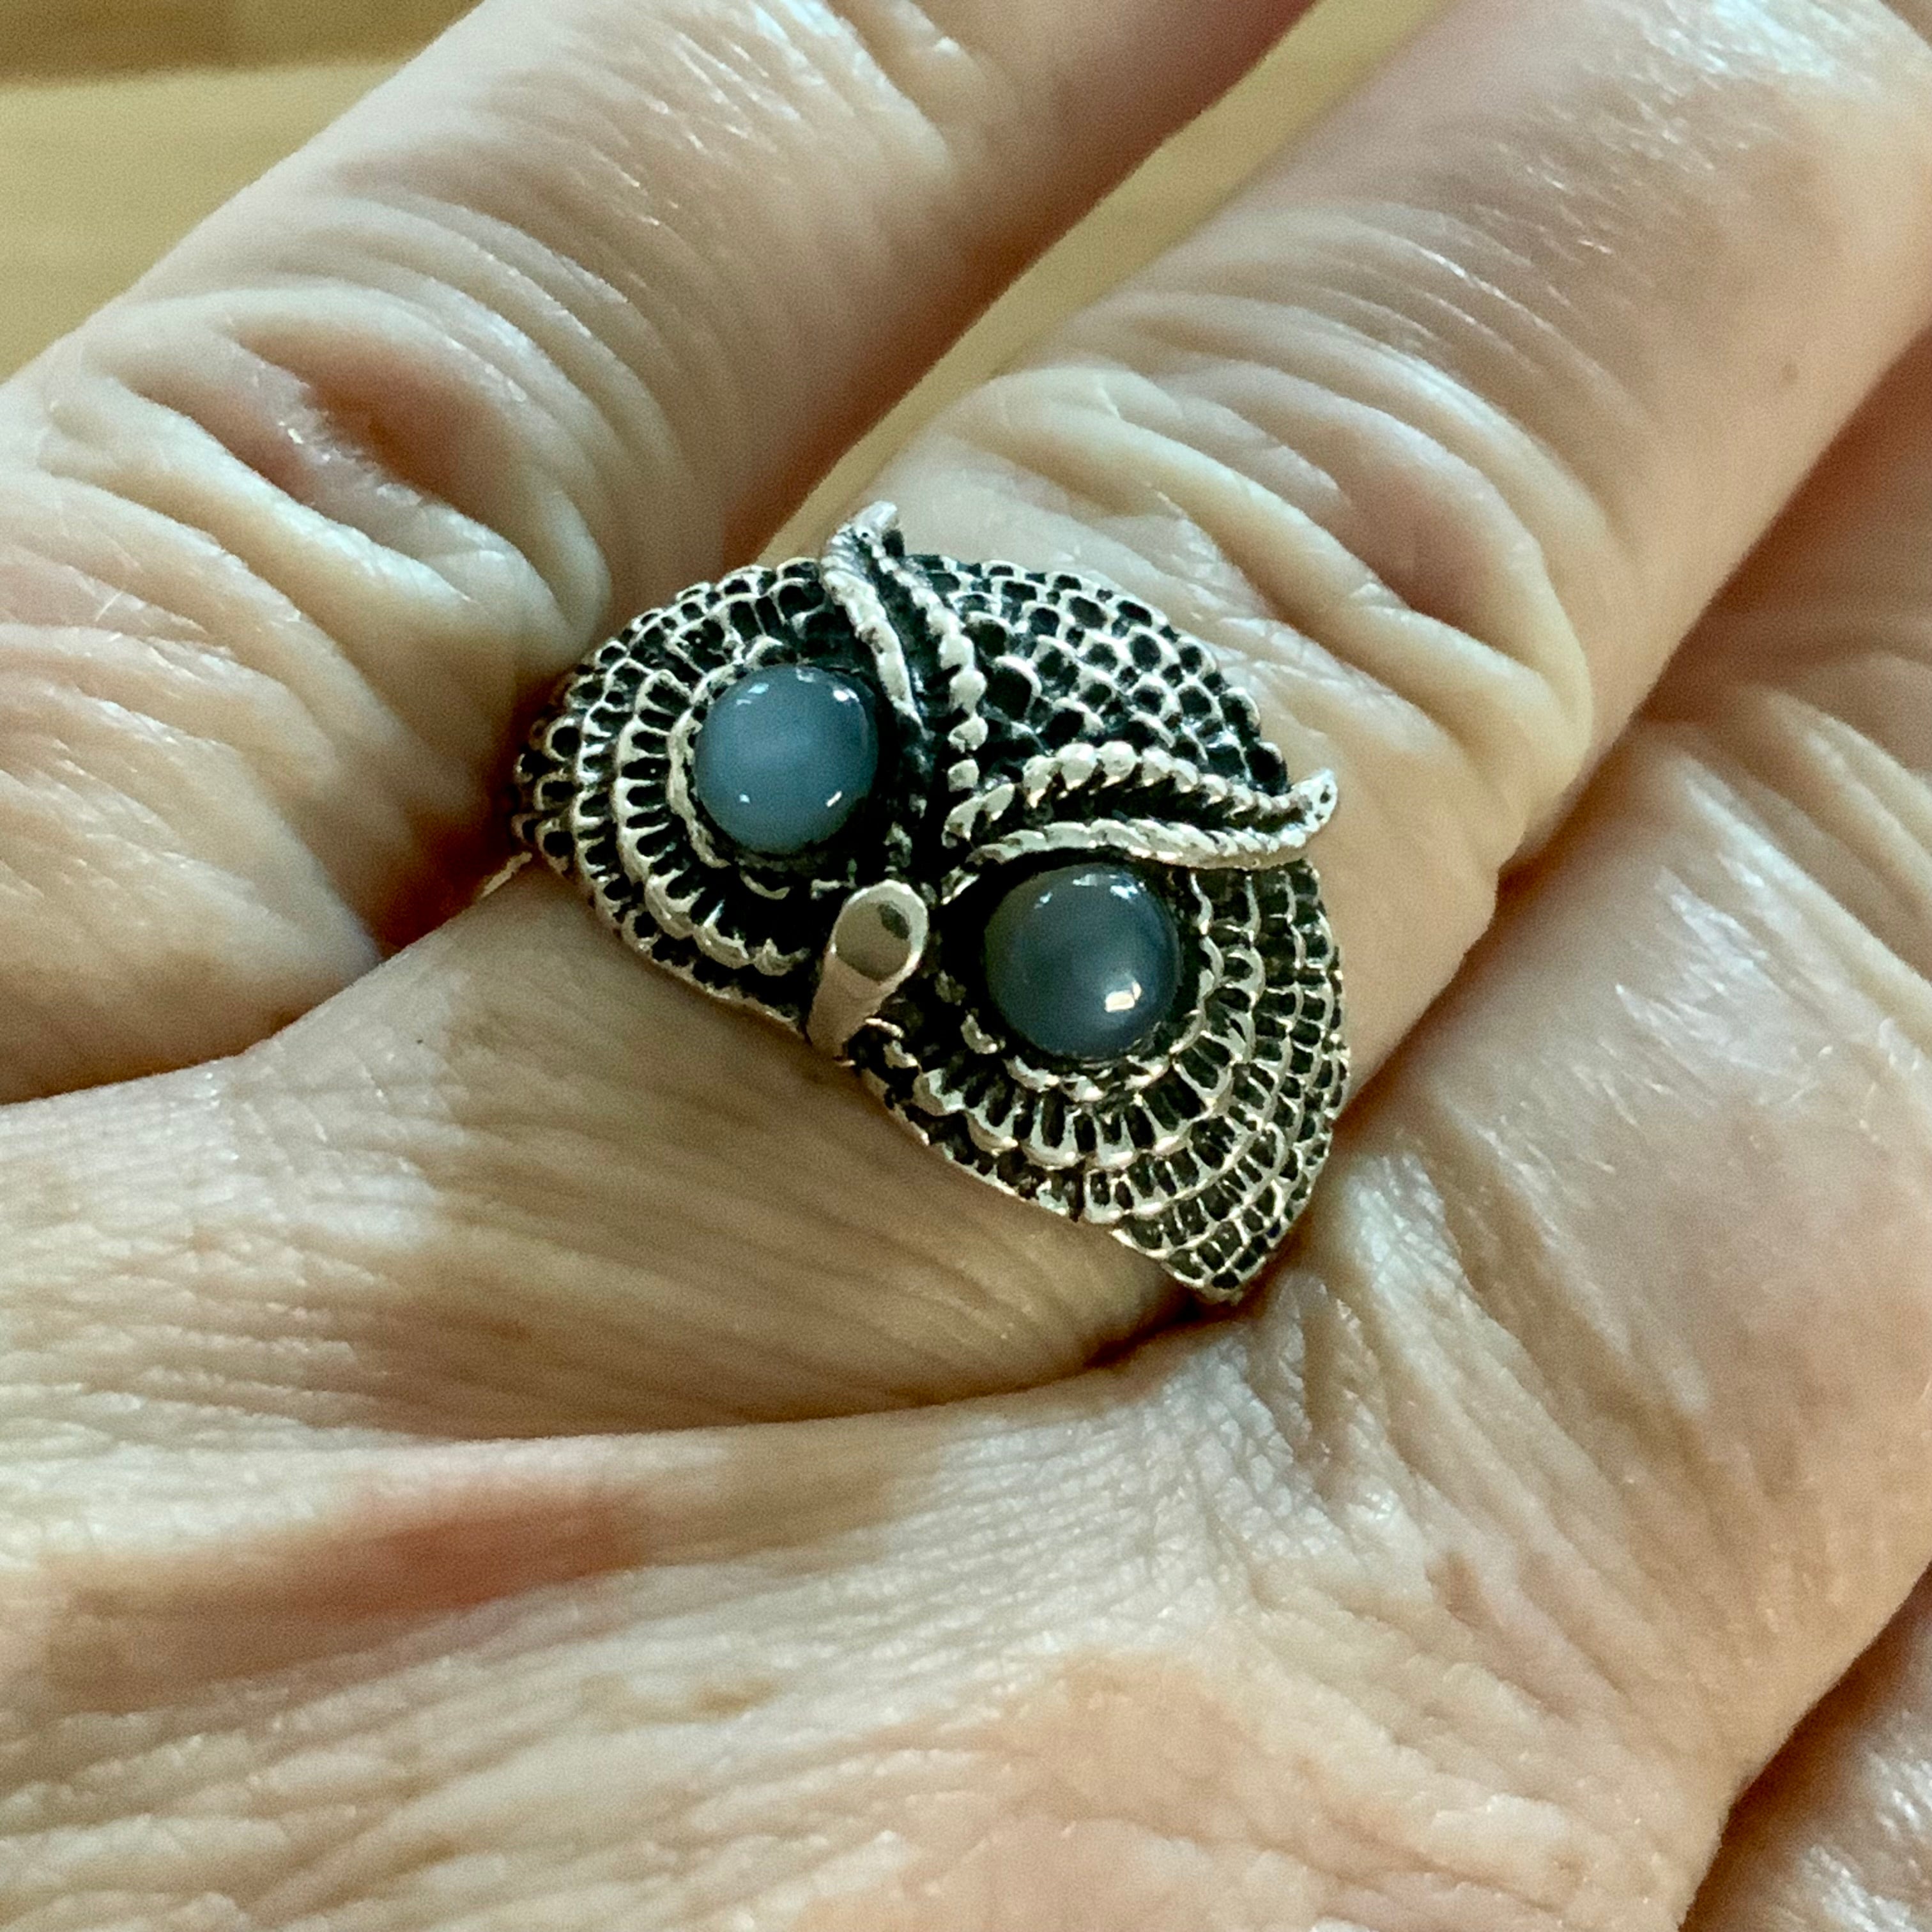 Owl Labradorite Solid 925 Sterling Silver Ring 8